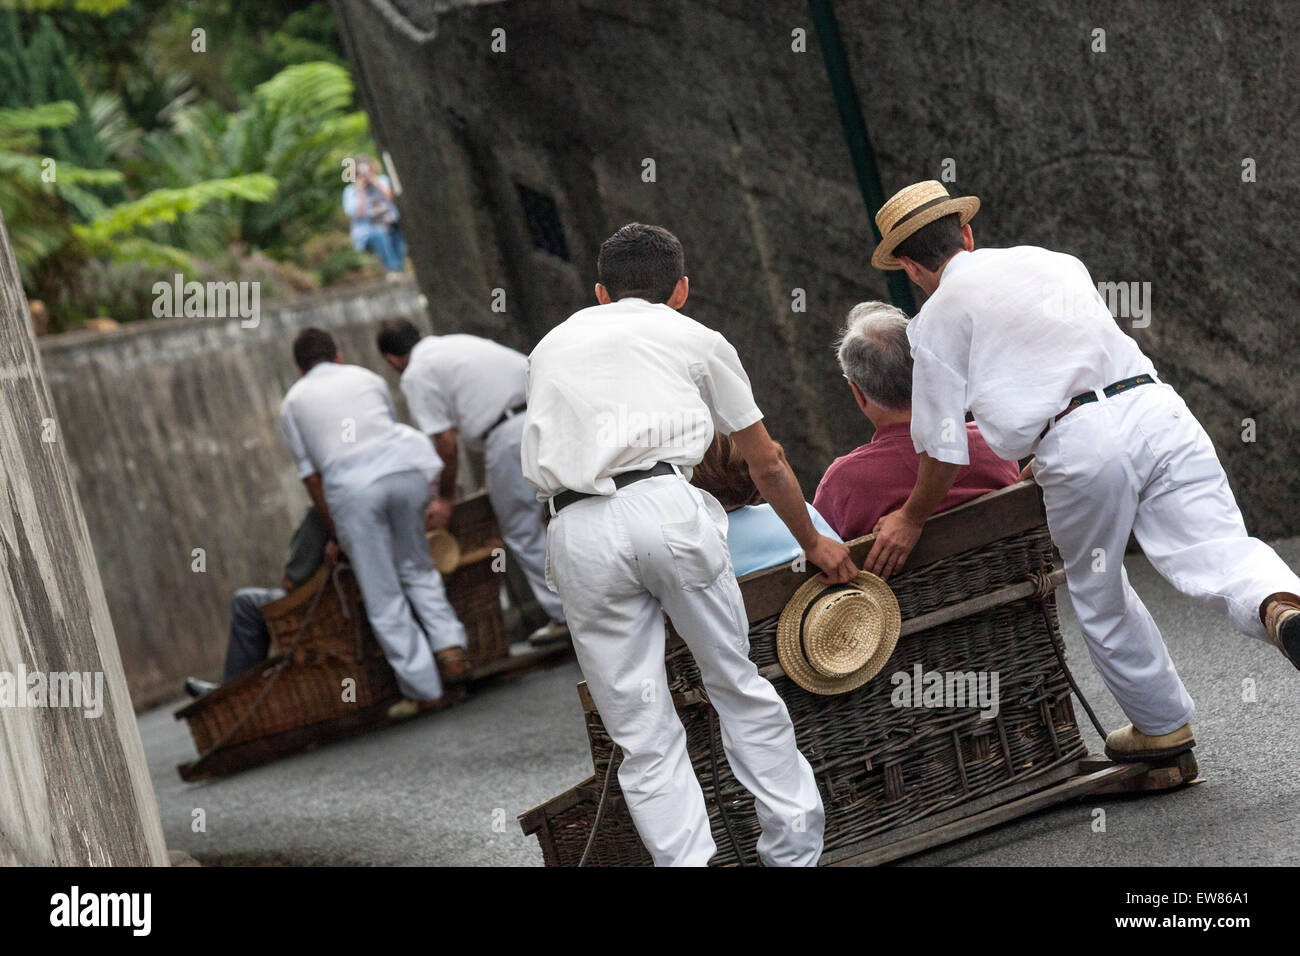 Typical tourist attraction of Carros de cesto do Monte in Funchal, Madeira,  Portugal Stock Photo - Alamy